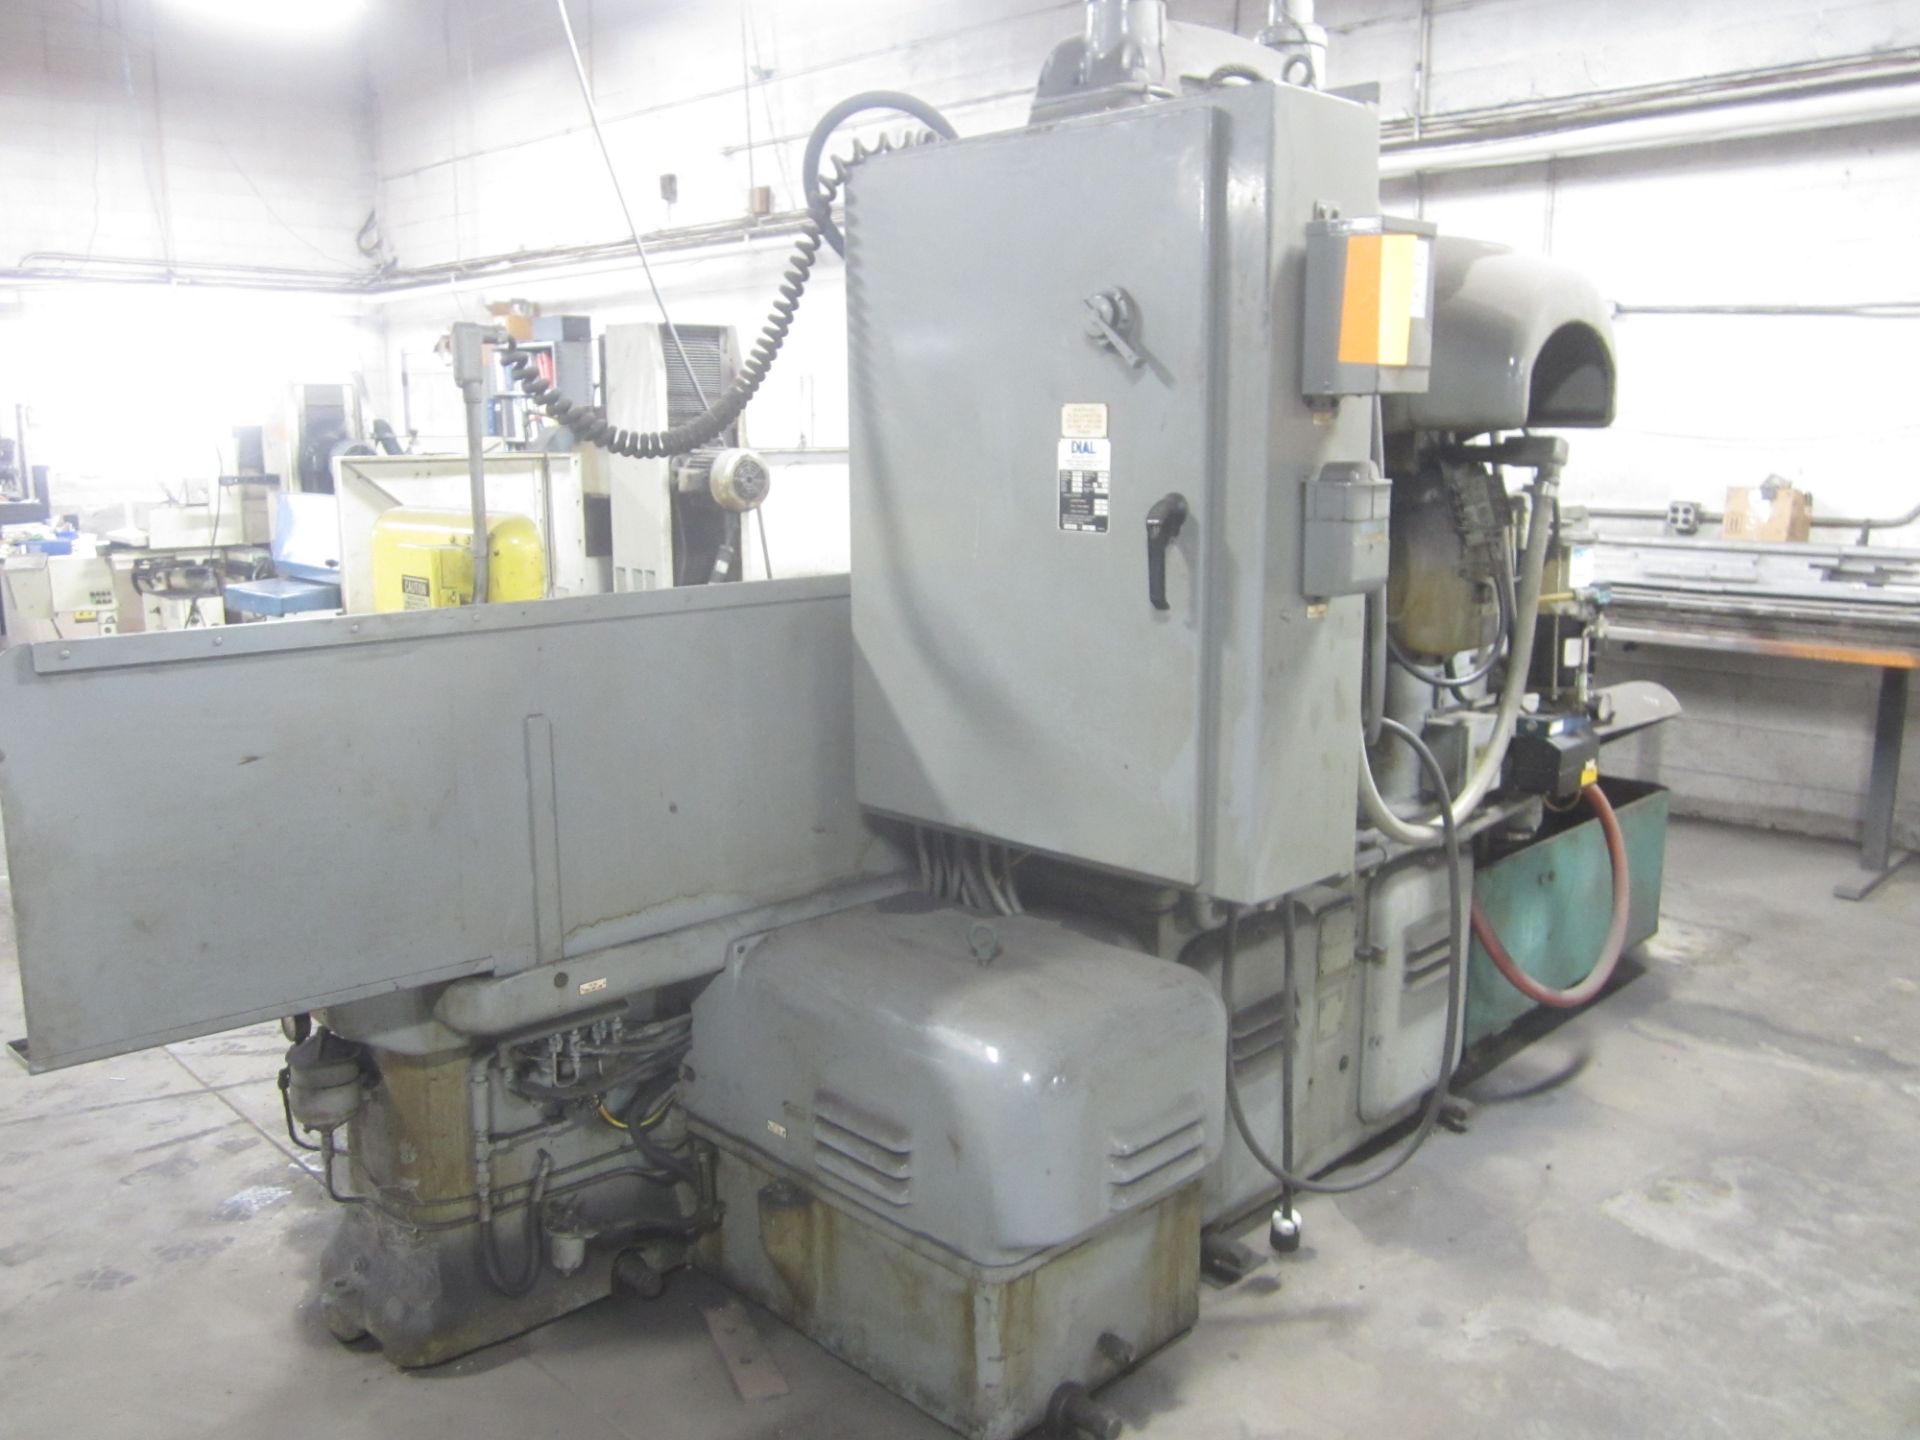 Mattison 14” X 60”, 2-Axis Surface Grinder, s/n 12480, with Power Elevation, Electric Chuck with - Image 7 of 11